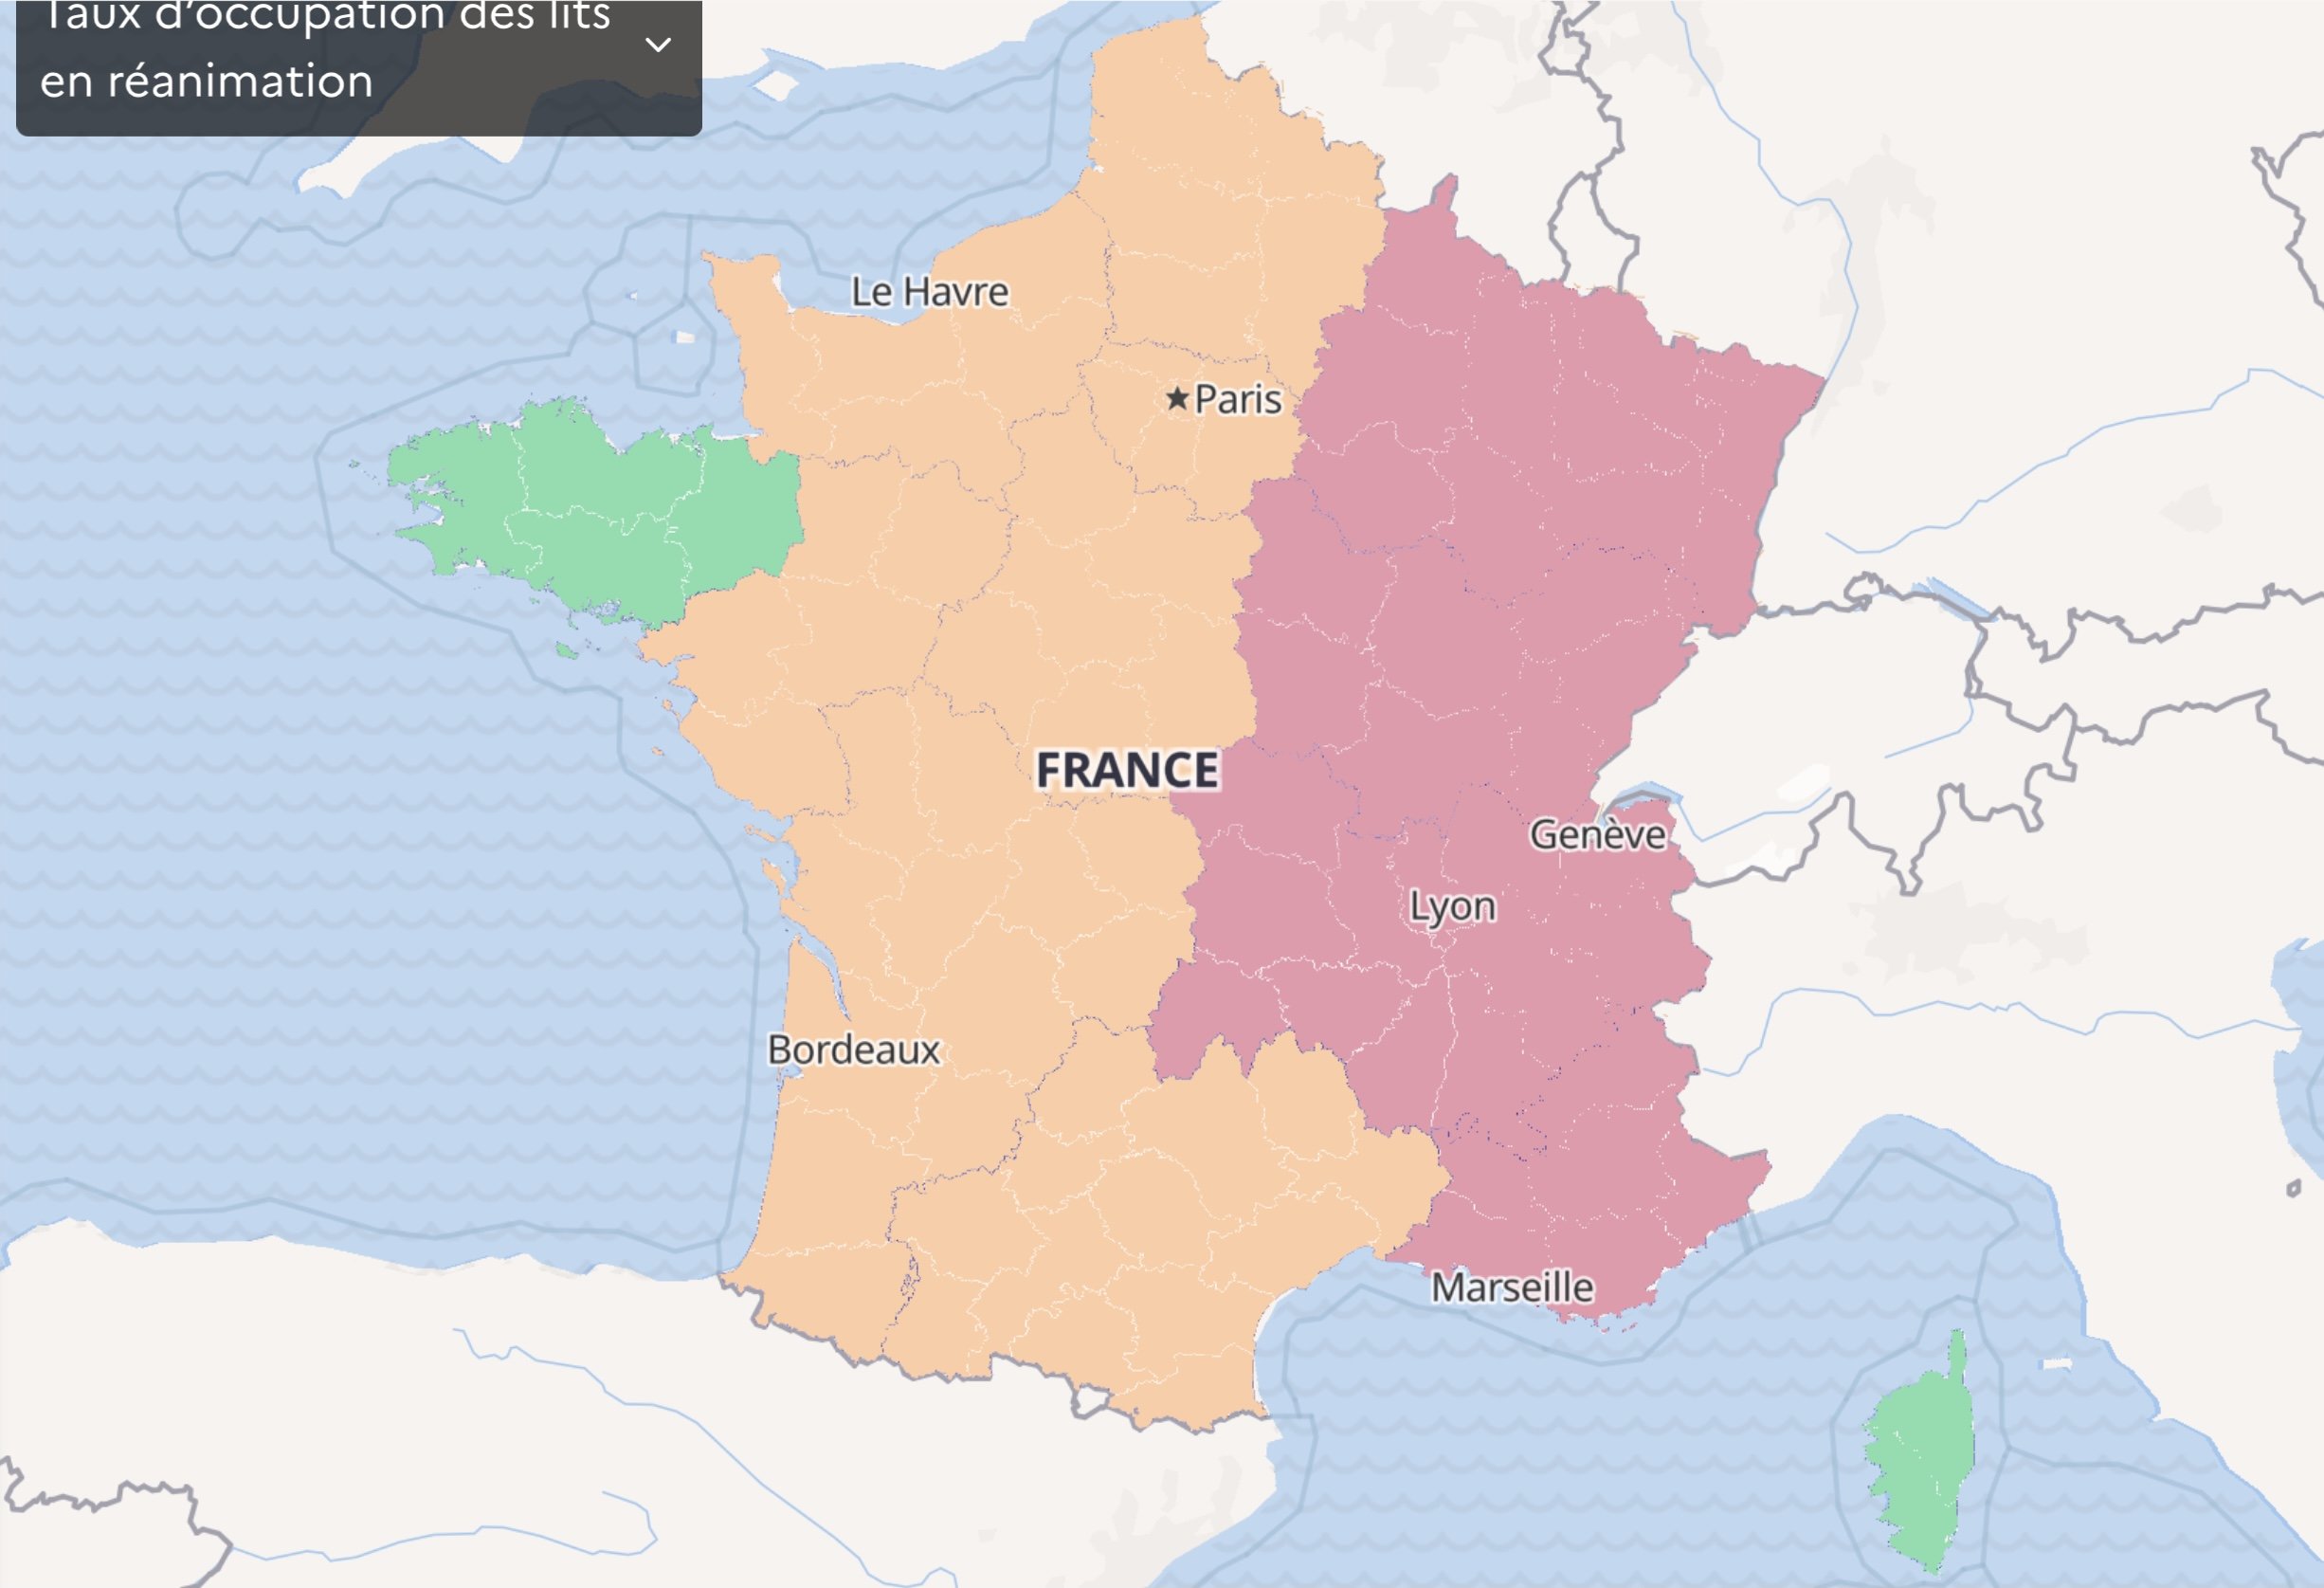 Temporary exclusion of "lockdown" 20 provinces in eastern France may extend curfew hours